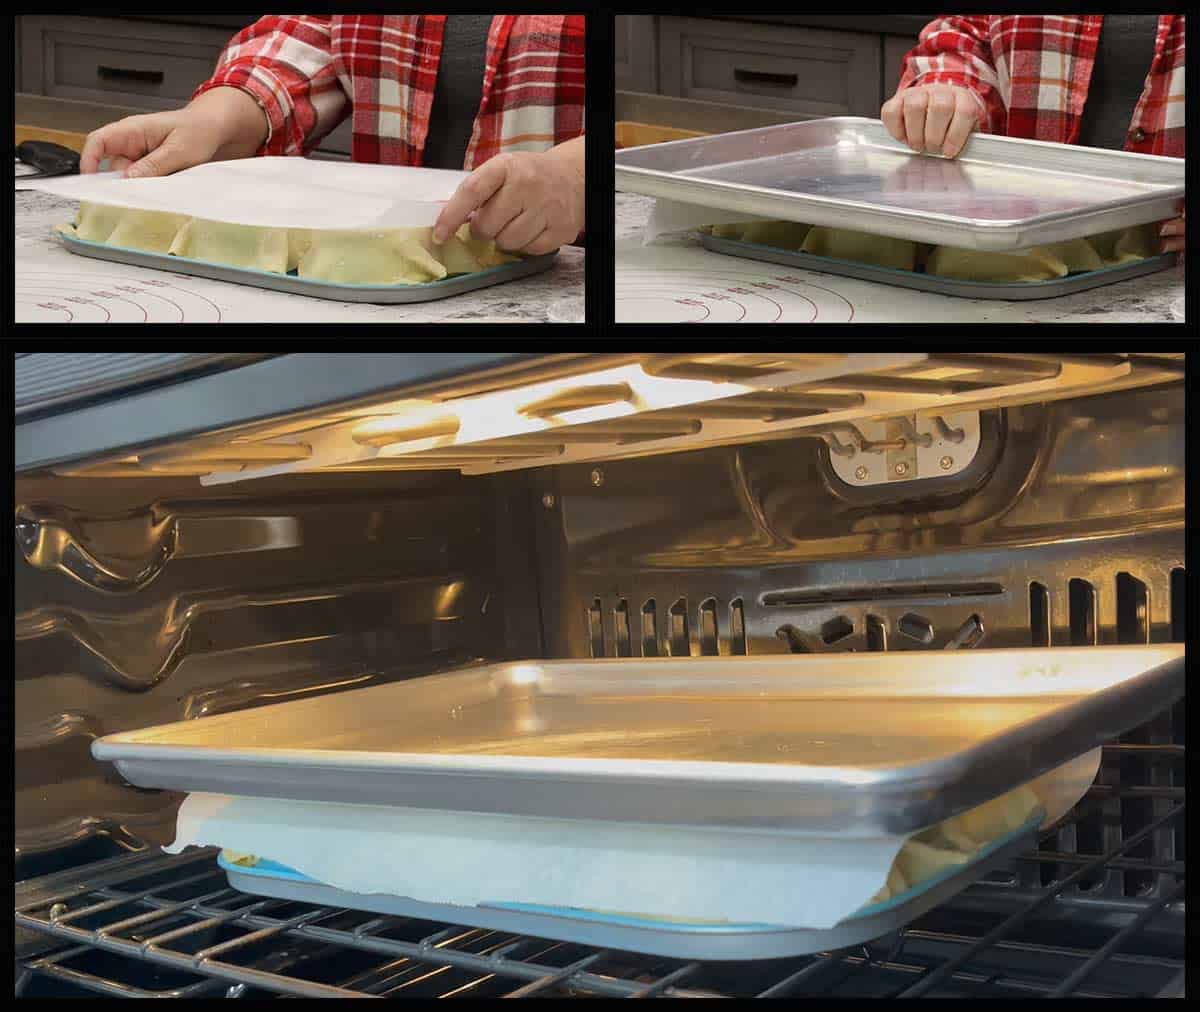 Placing parchment and tray over pastry dough and putting it into the oven to bake.